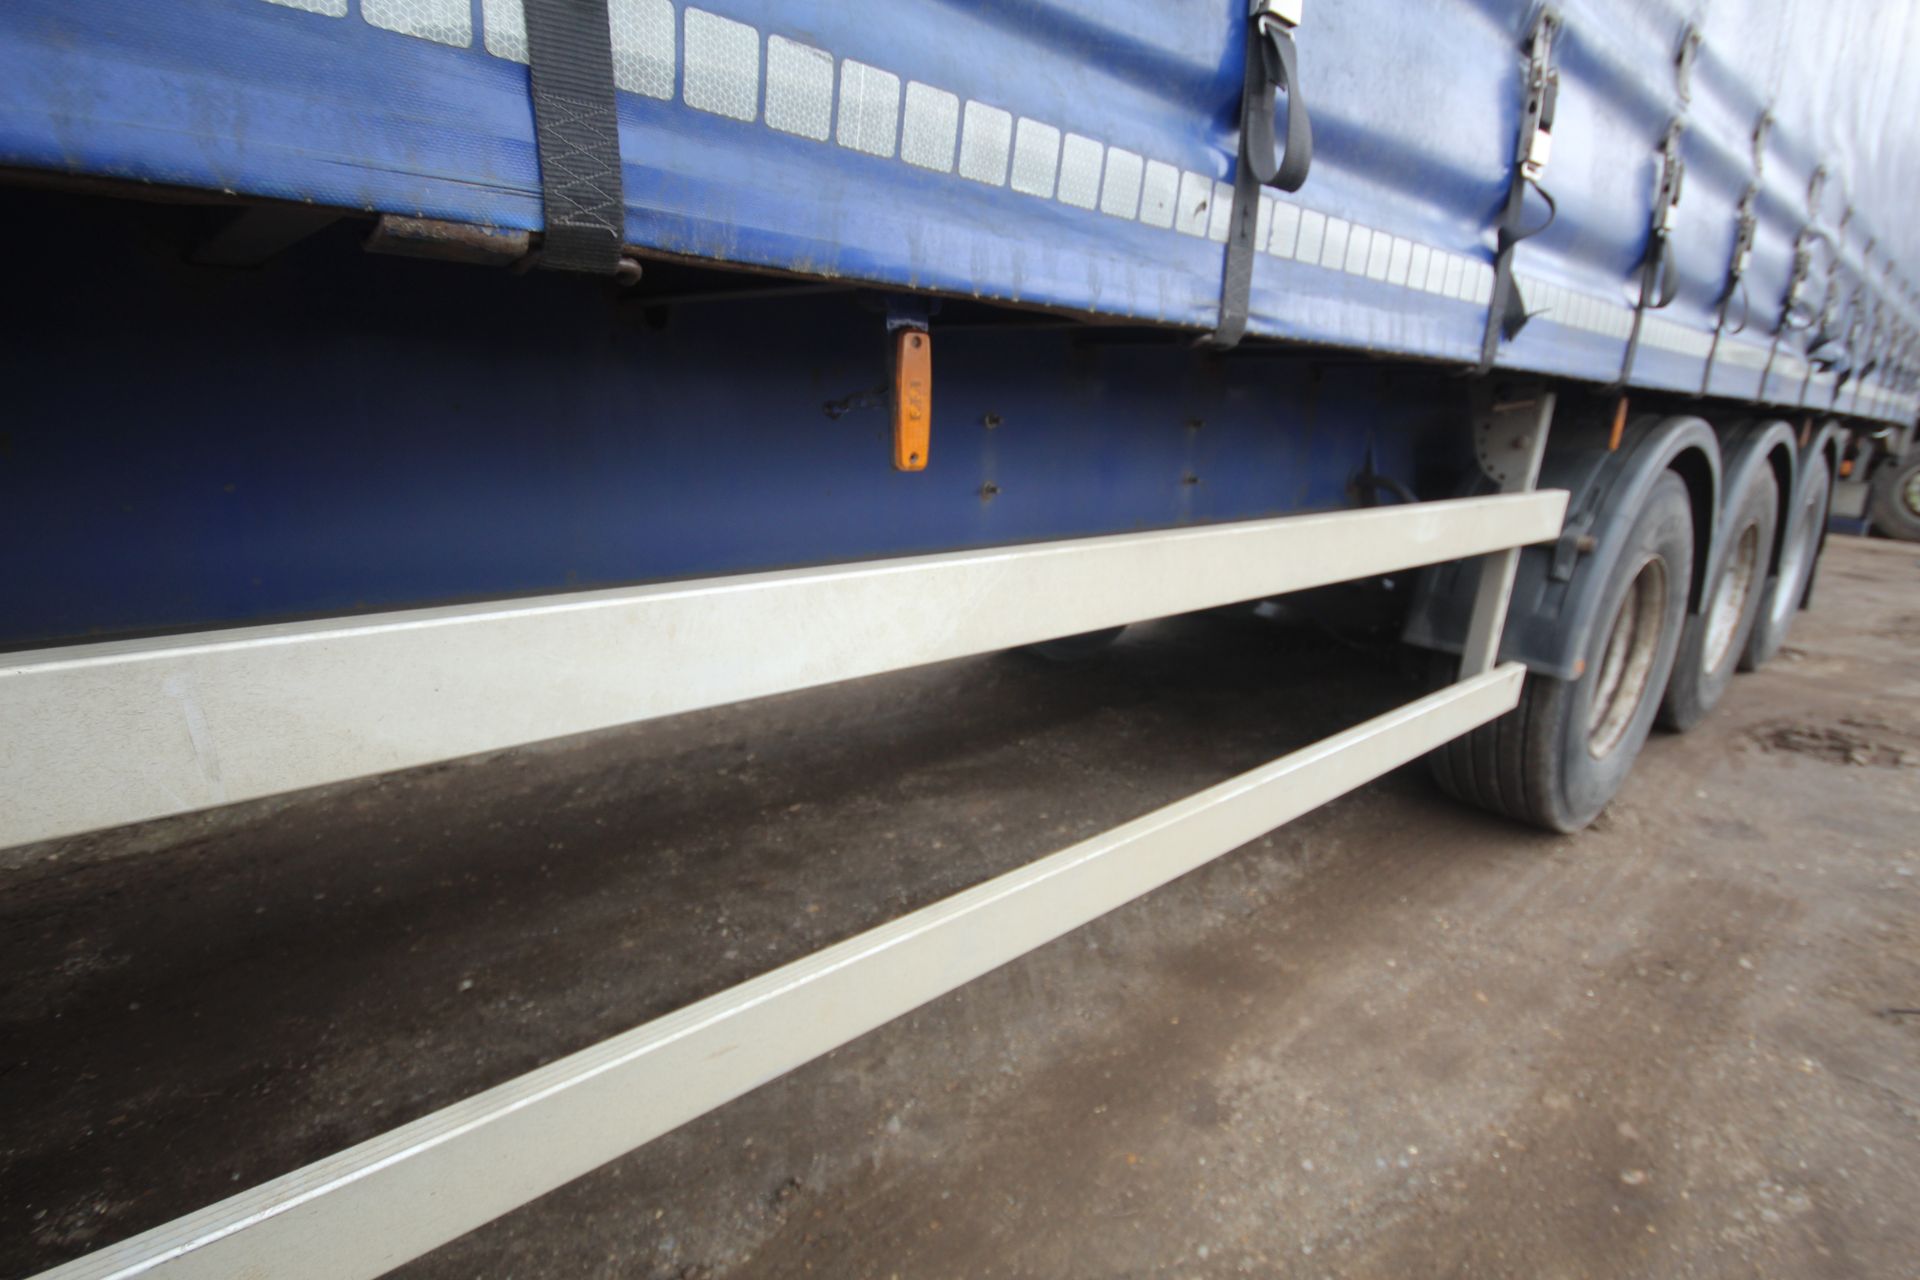 **CATALOGUE CHANGE** Montracon 39T 13.7m tri-axle curtain-side trailer. Registration C224538. Date - Image 18 of 74